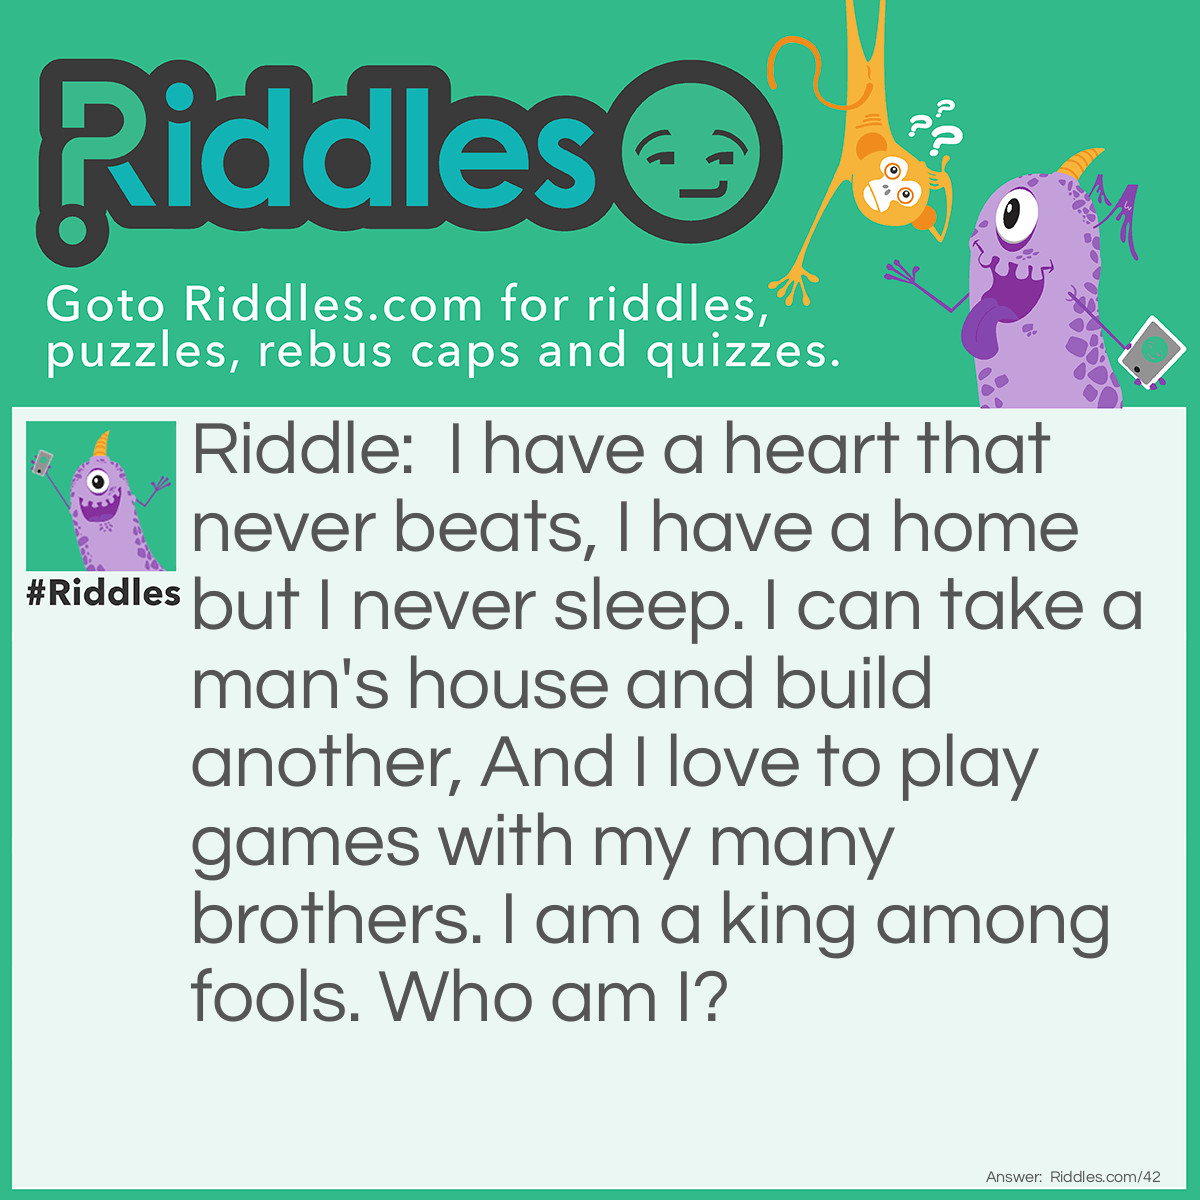 Riddle: I have a heart that never beats, I have a home but I never sleep. I can take a man's house and build another, And I love to play games with my many brothers. I am a king among fools. <a href="https://www.riddles.com/who-am-i-riddles">Who am I</a>? Answer: The King of Hearts in a deck of cards.